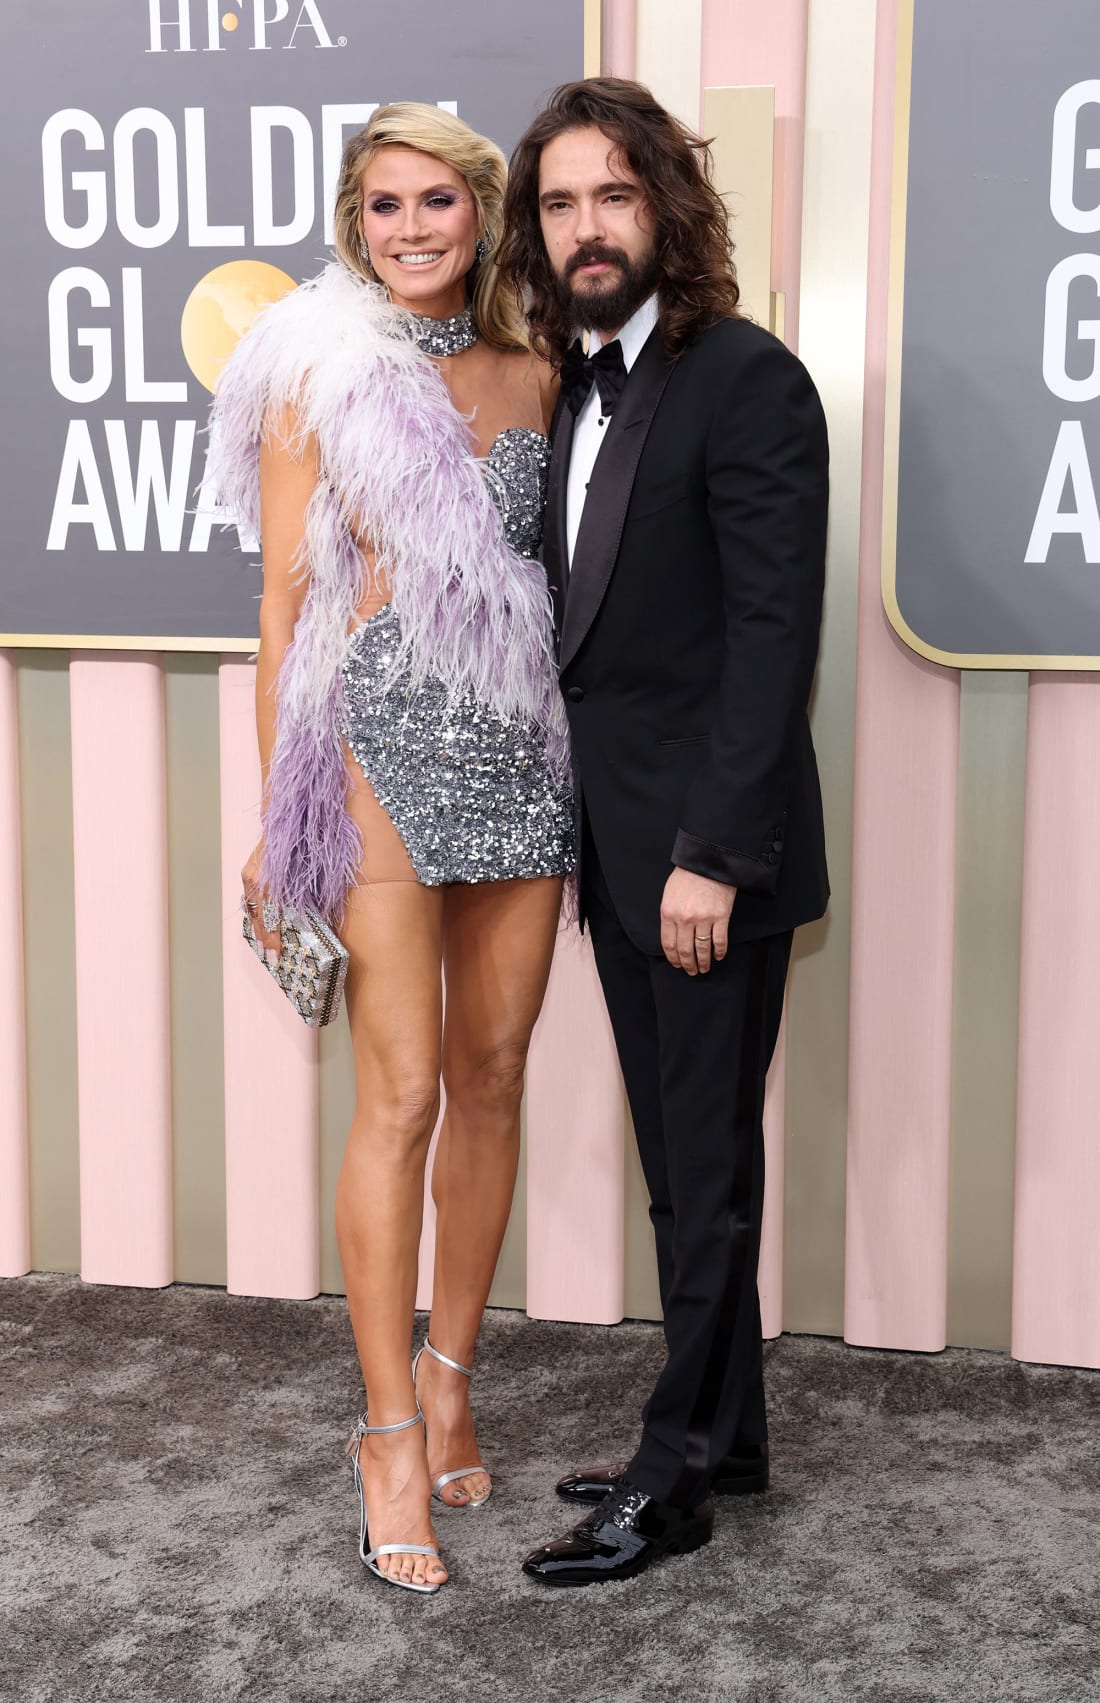 Heidi Klum, in an eye-catching look by Kevin Germanier, poses with husband Tom Kaulitz.